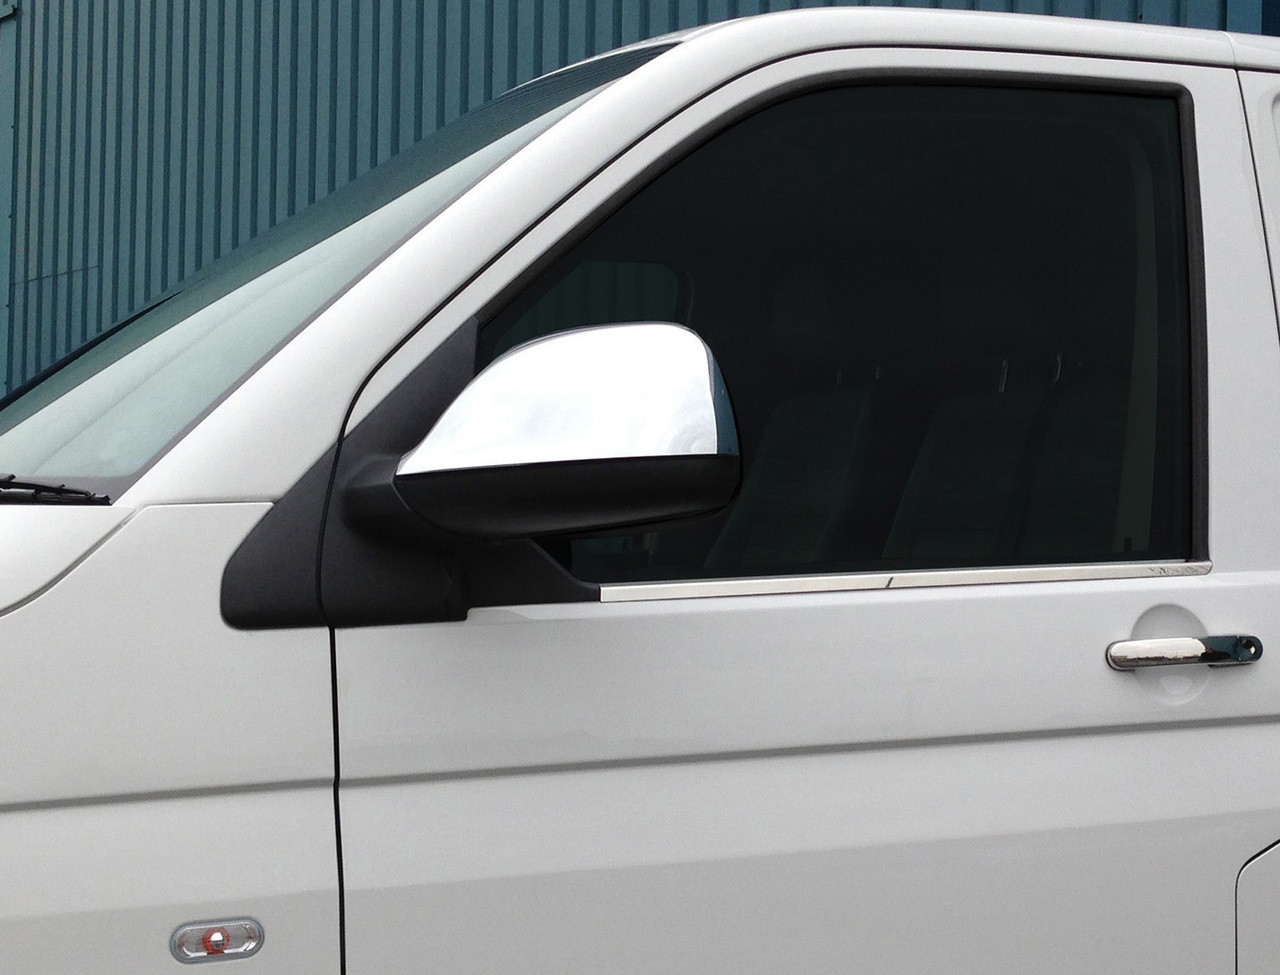 S.Steel Chrome Mirror Trim Set Covers To Fit Volkswagen T5 Caravelle (2010-15)